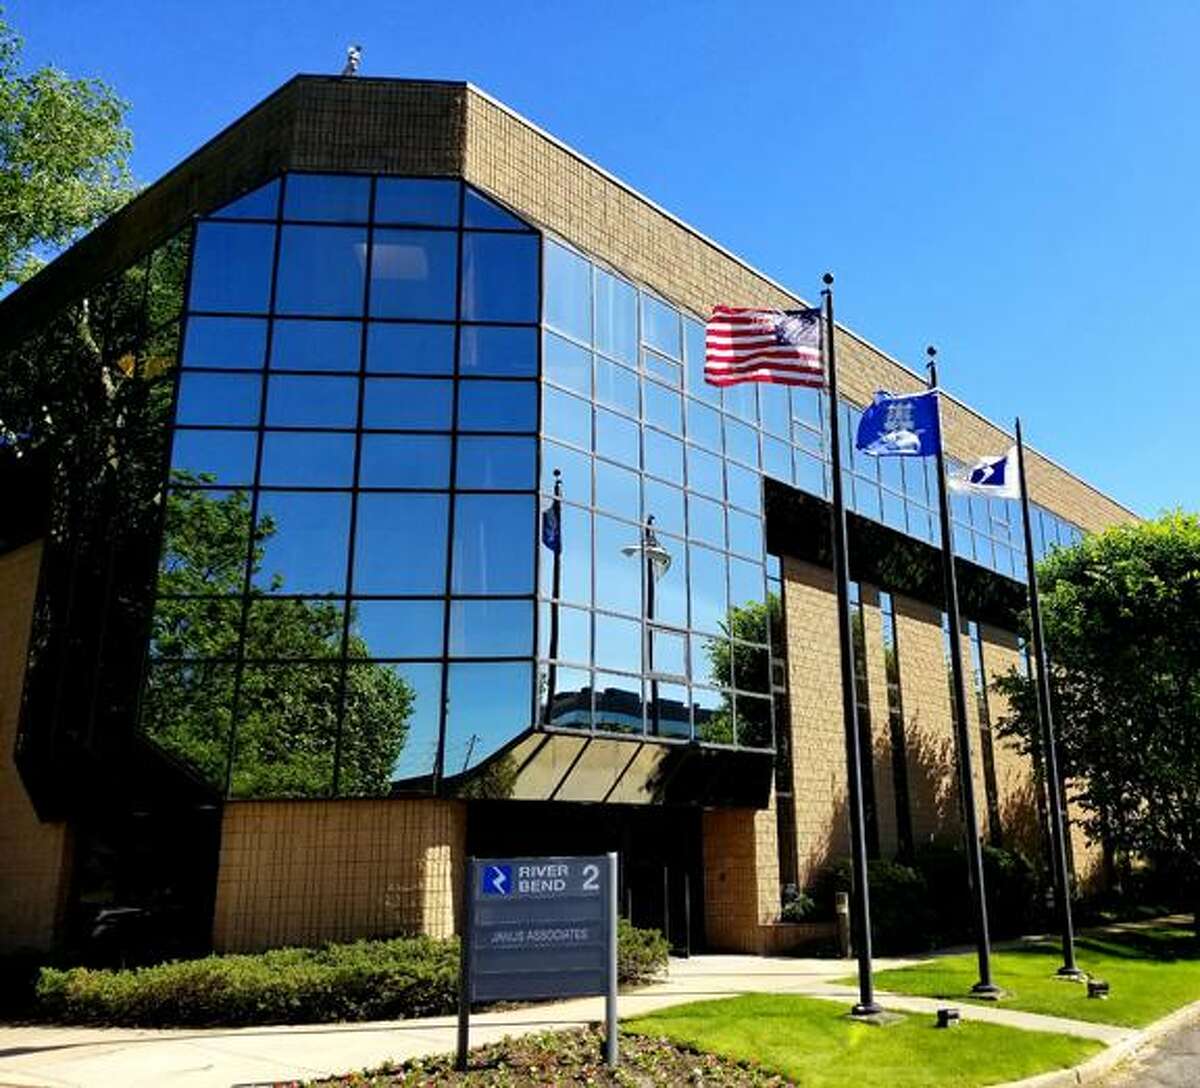 Data-security firm Janus Associates has relocated within Stamford, to 2 Omega Drive, in the River Bend Center complex in the city’s Springdale section.